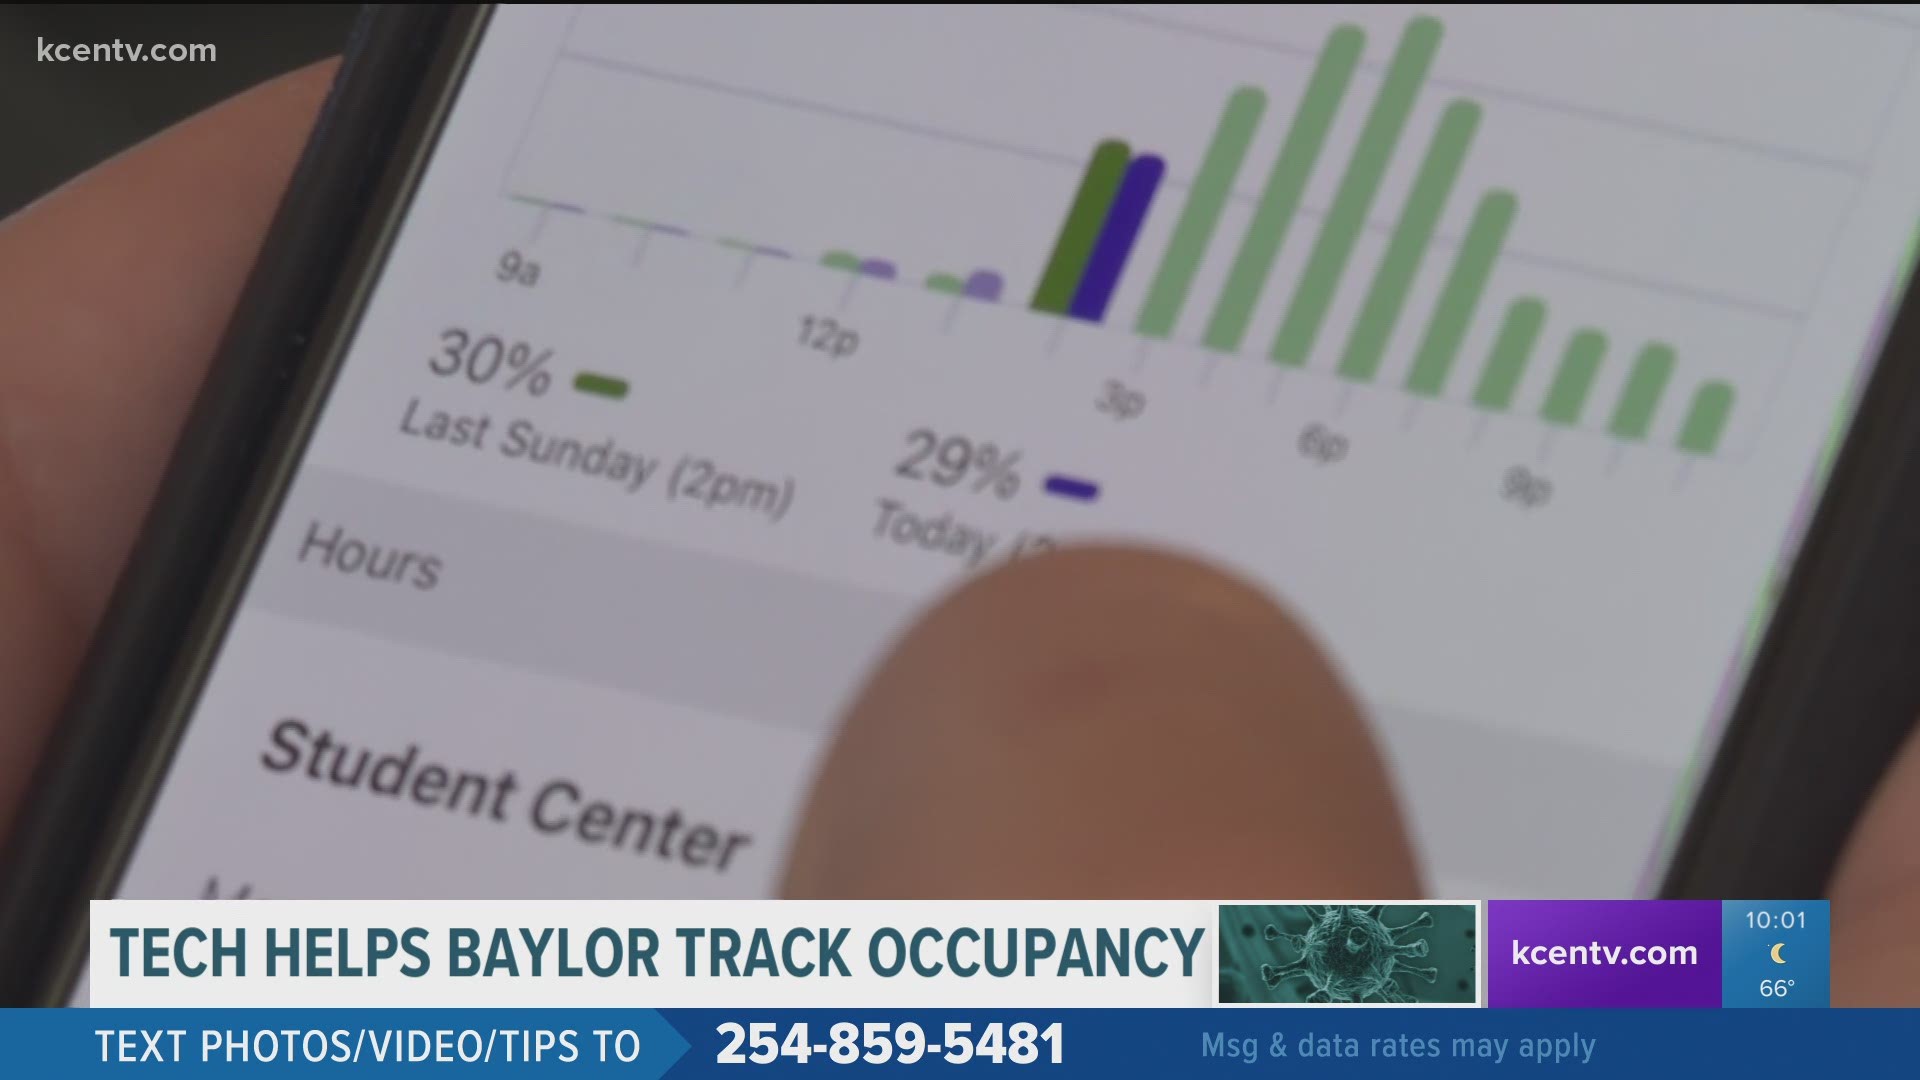 Baylor University is making sure its students no longer have to worry about a building being too crowded without knowing beforehand with the tech product, Occuspace.